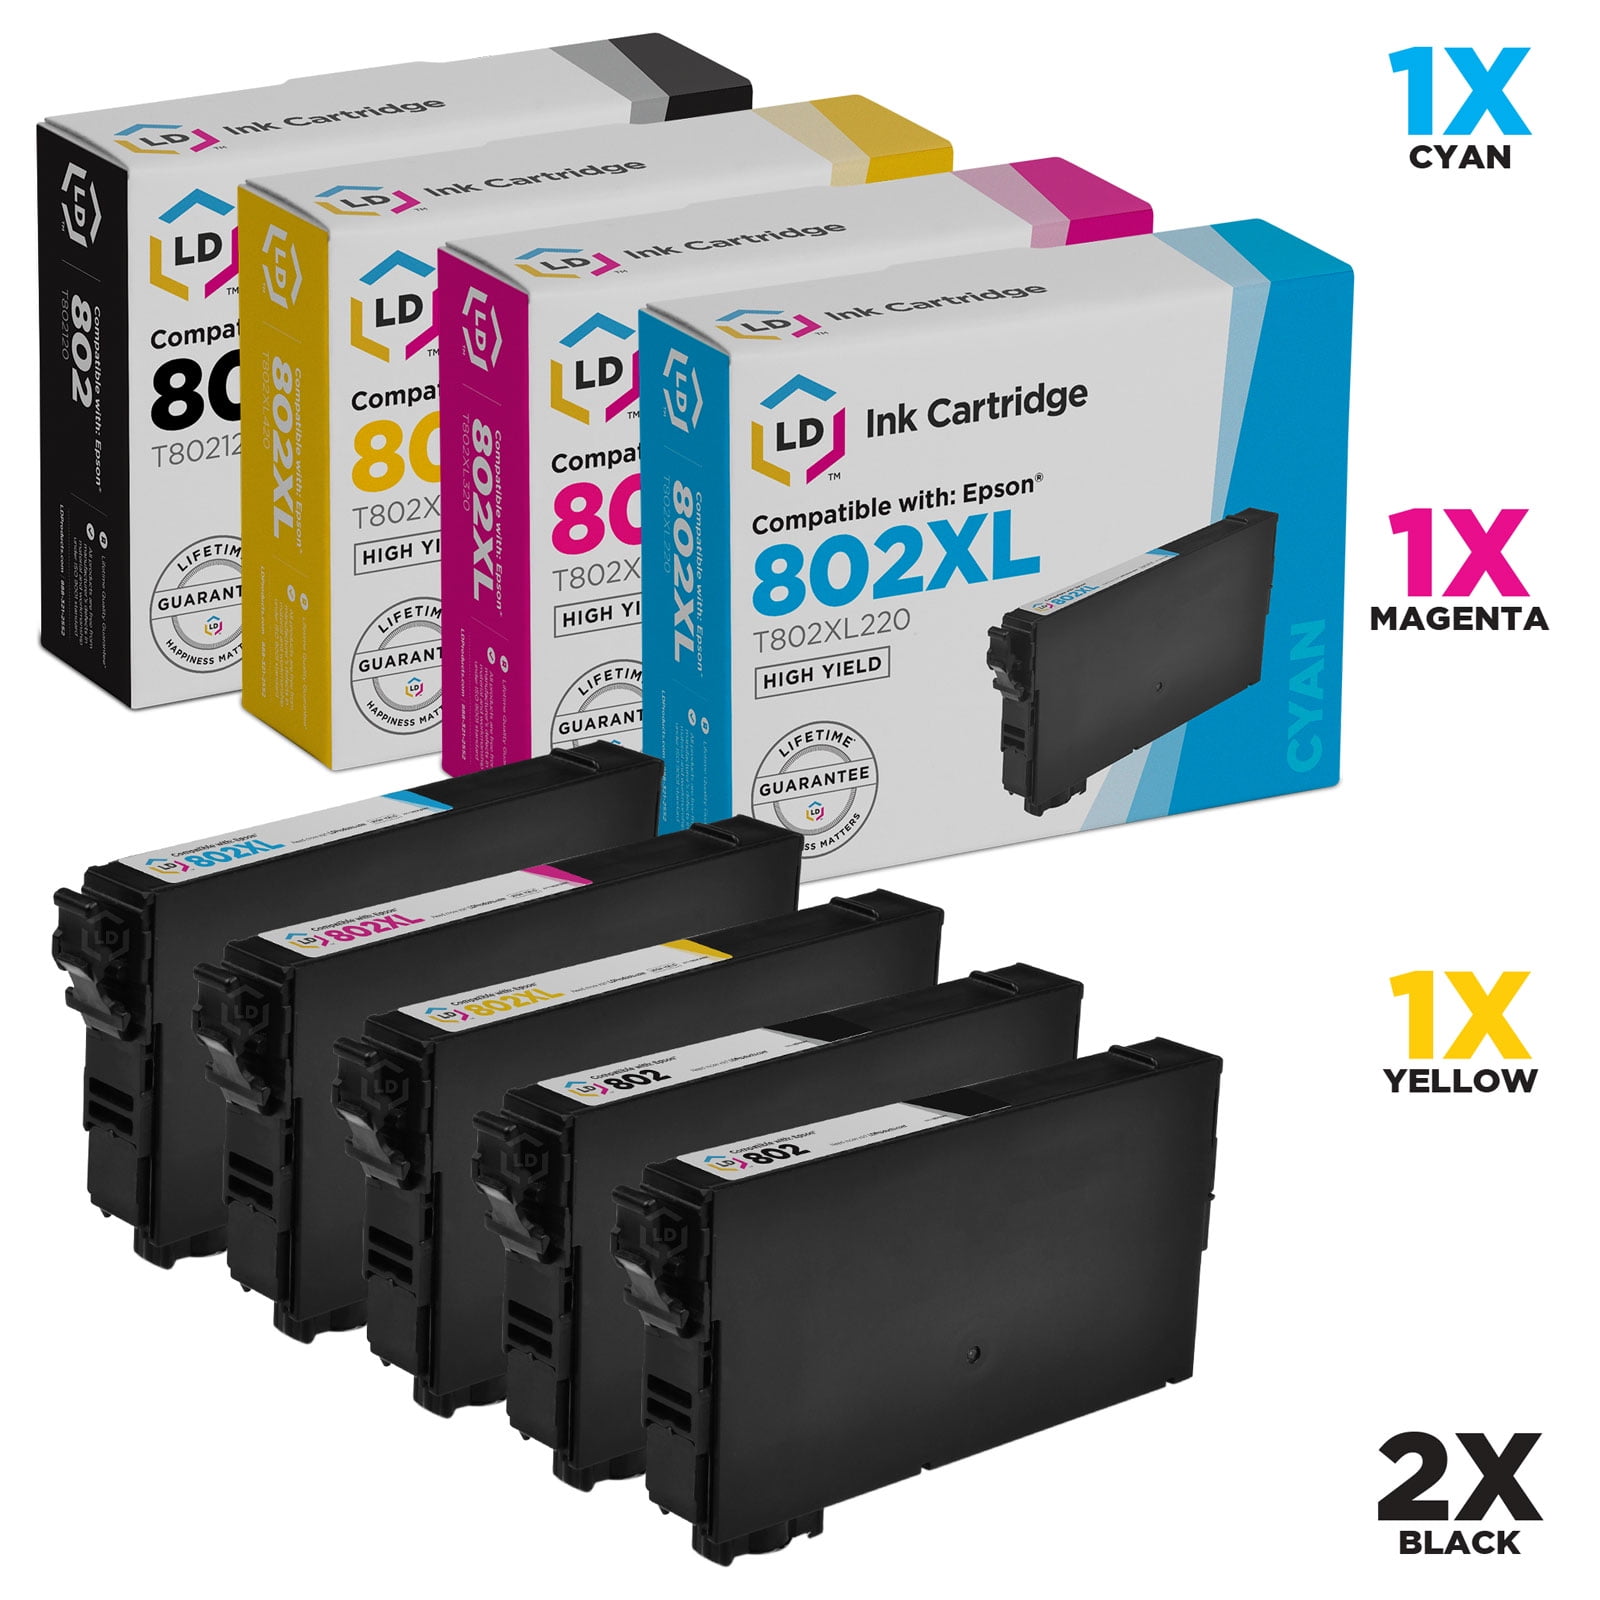 Uniwork Remanufactured Ink Cartridge Replacement for Epson 802 T802 use for Workforce Pro WF-4740 WF-4730 WF-4720 WF-4734 EC-4020 EC-4030 Printer Tray 2 Black